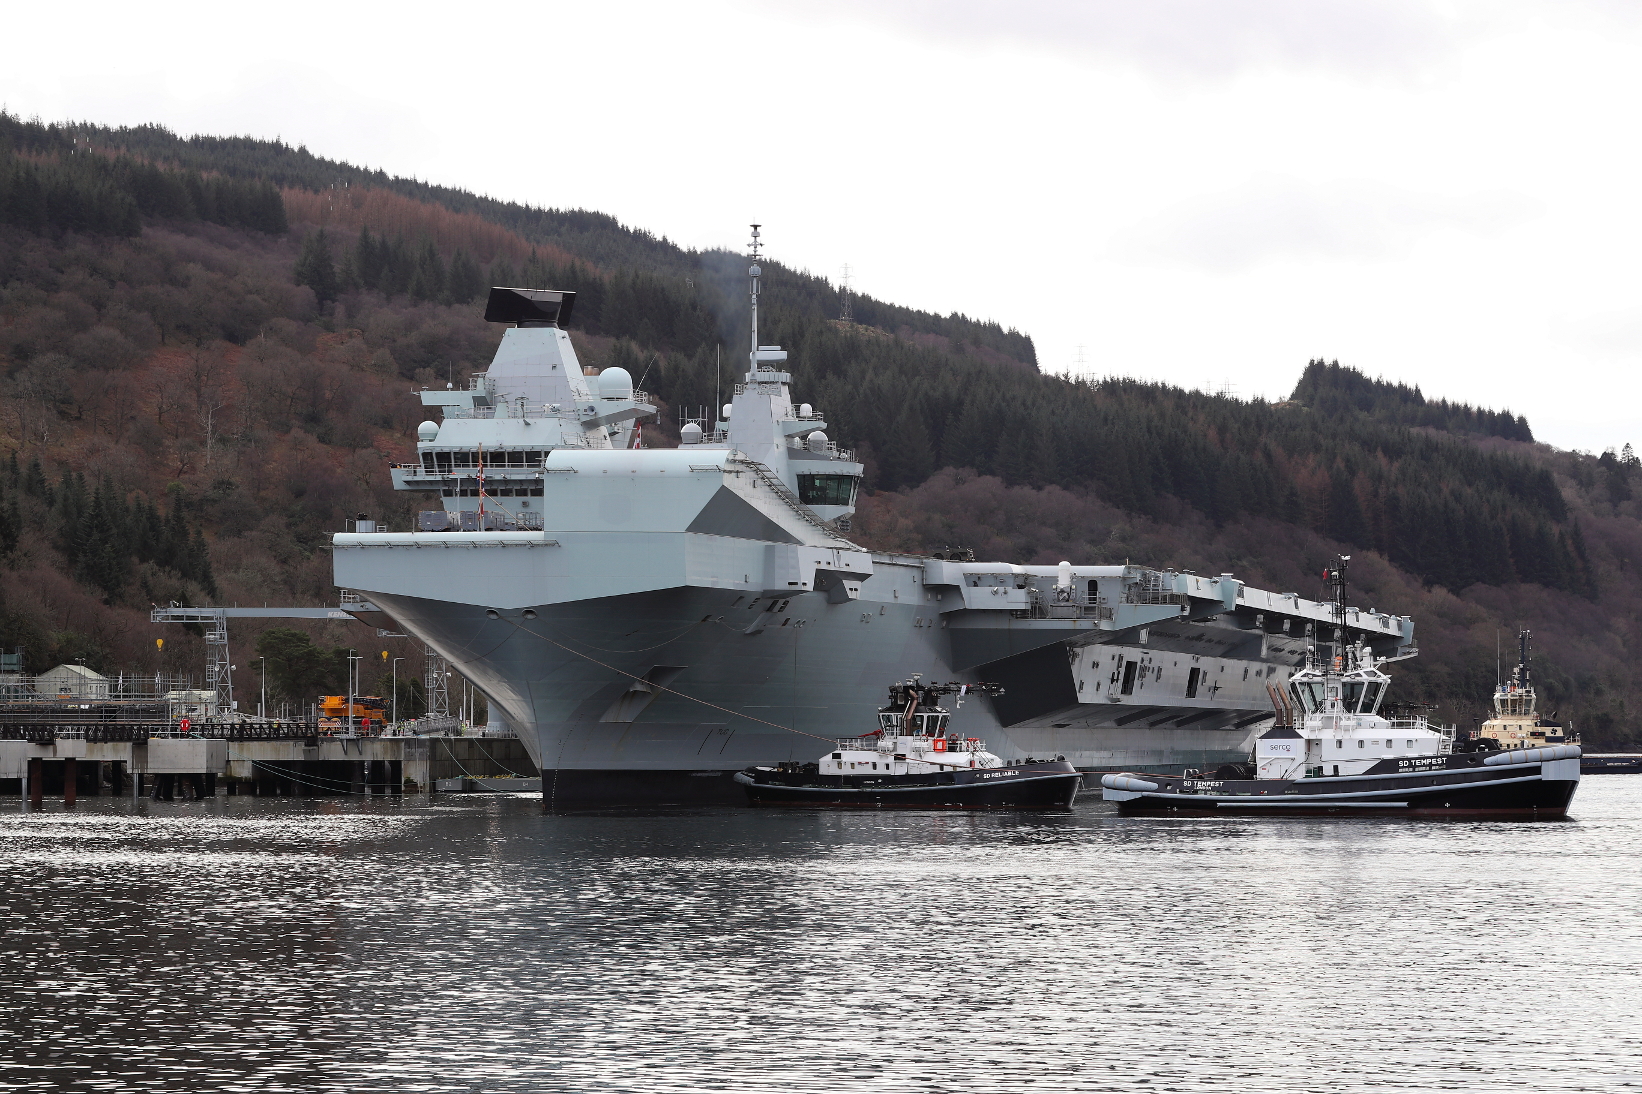 HMS Queen Elizabeth stopped off at Glen Mallen Norther Ammunition Jetty, western Scotland, ahead of her maiden operational voyage in 2021